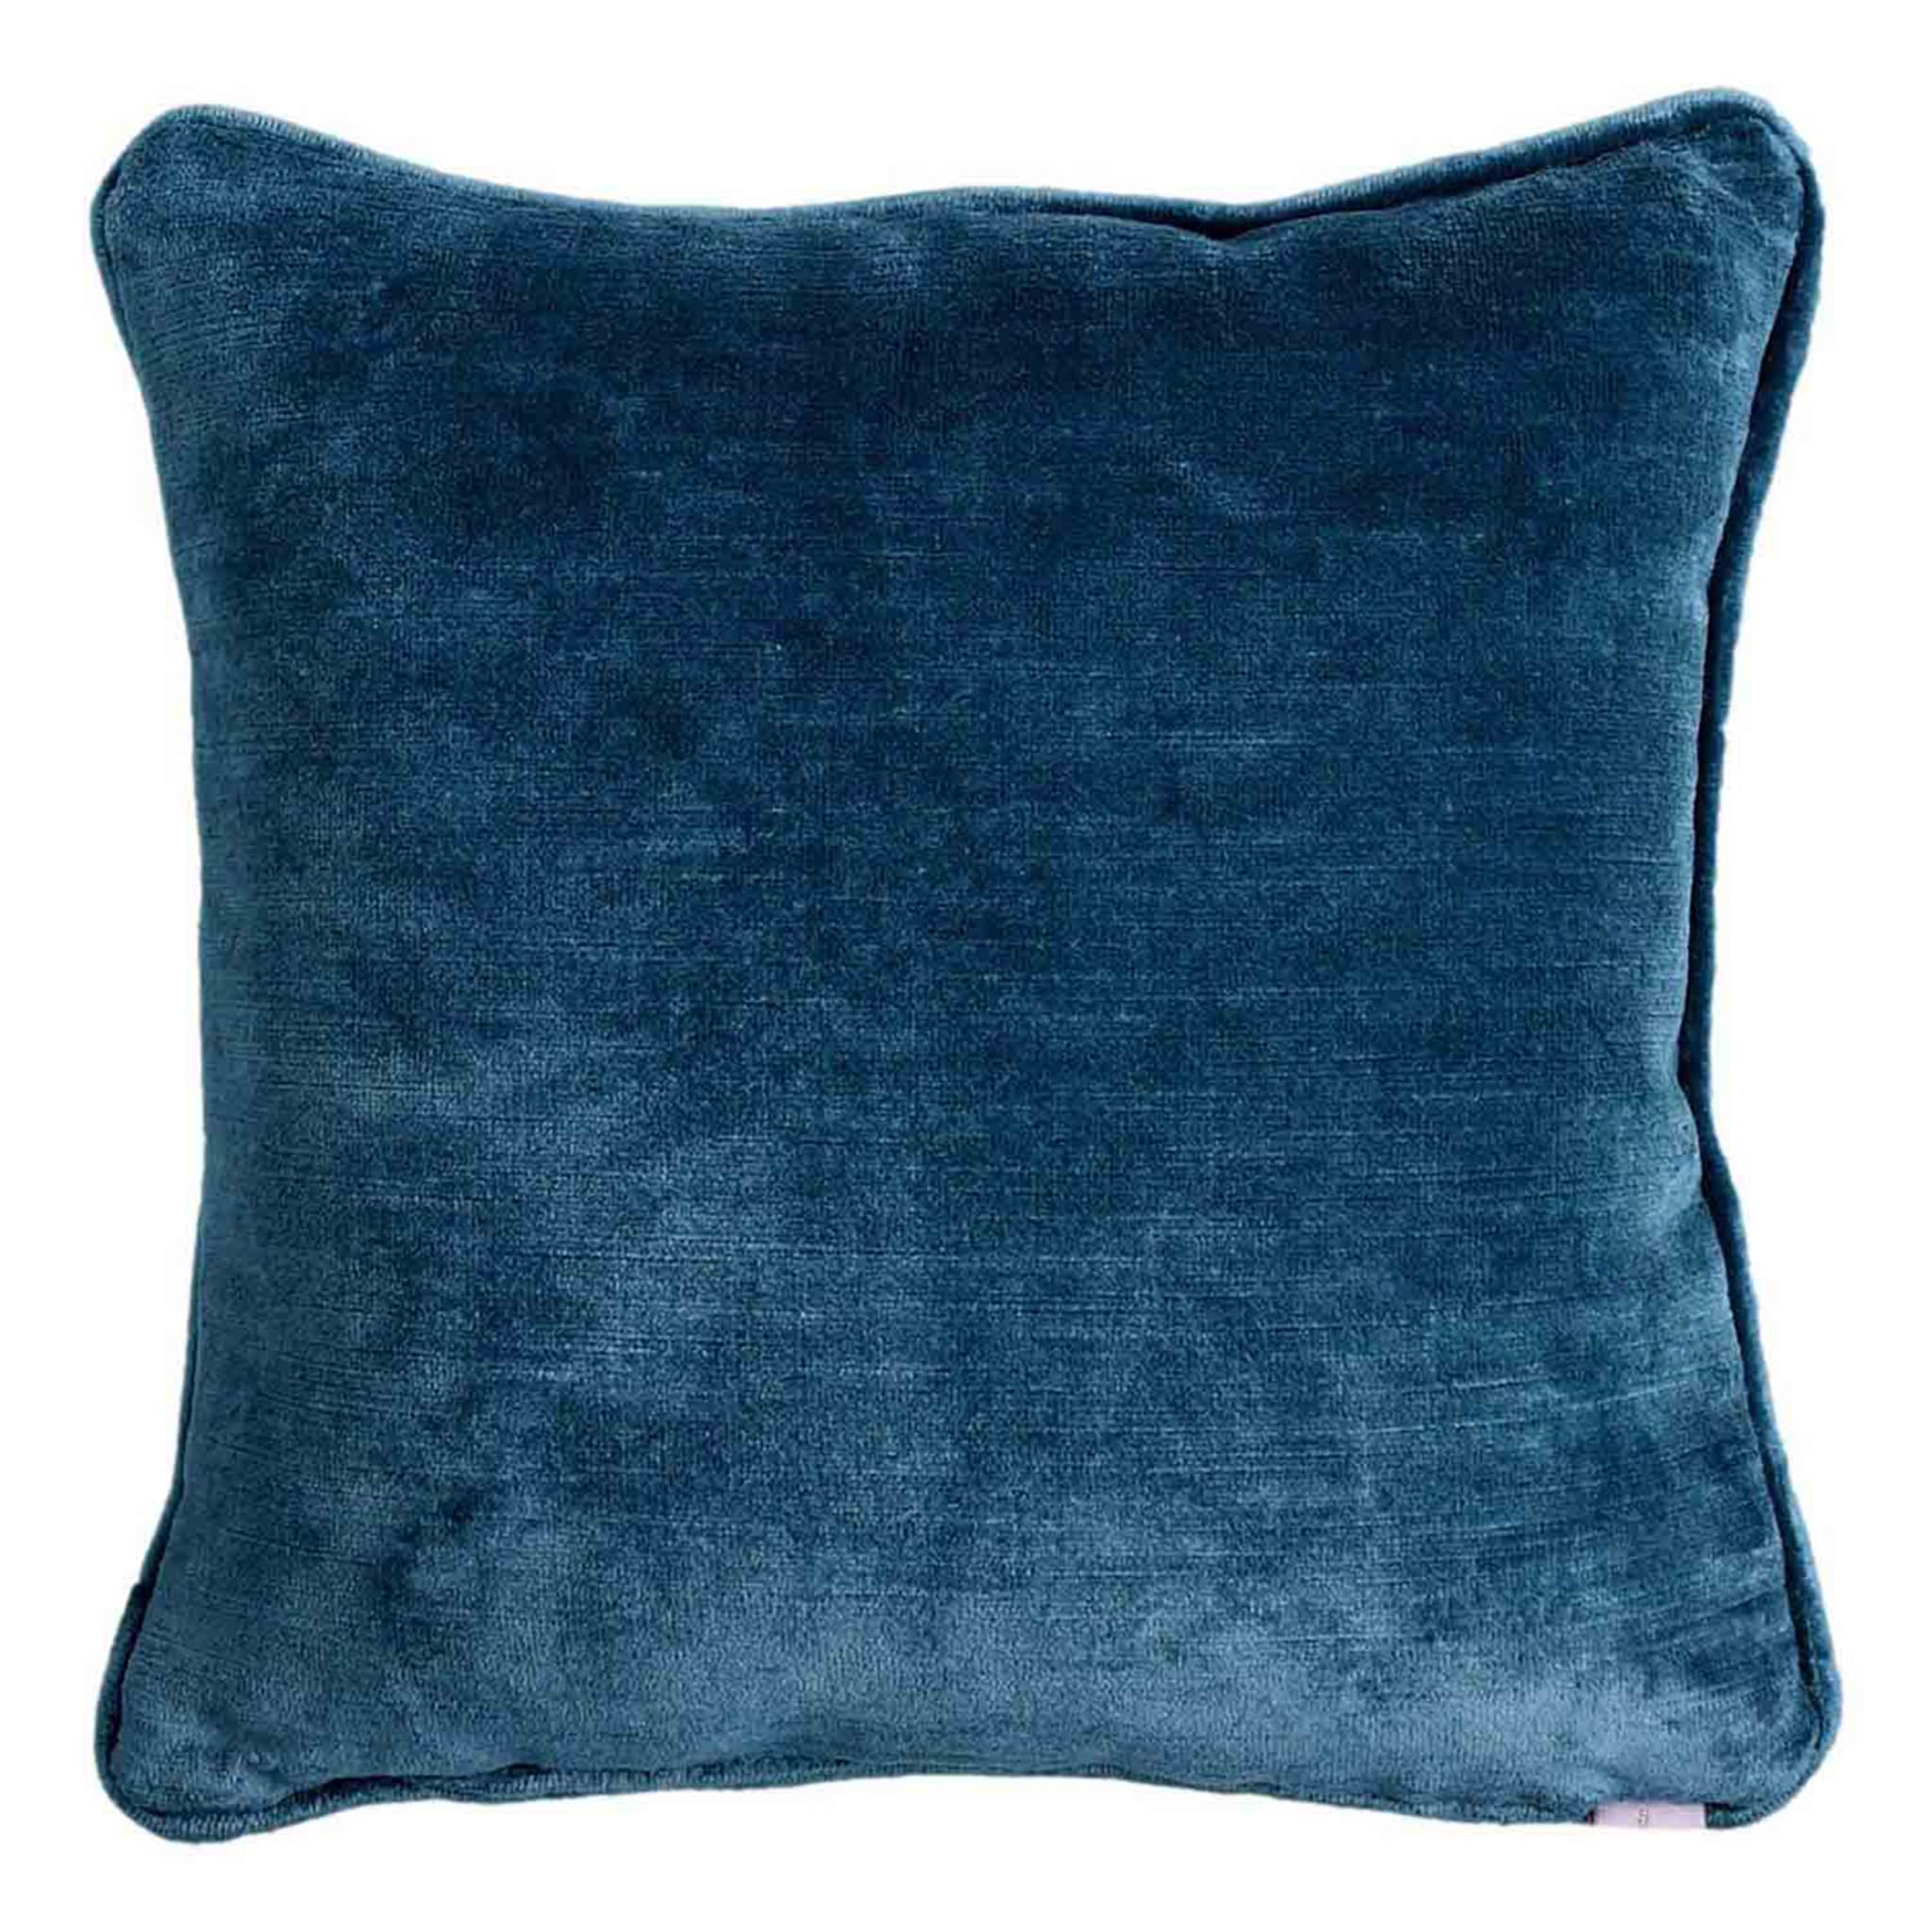 Turquoise Carrè Cushion in jacquard fabric and Linen Velvet - Alternative view 1